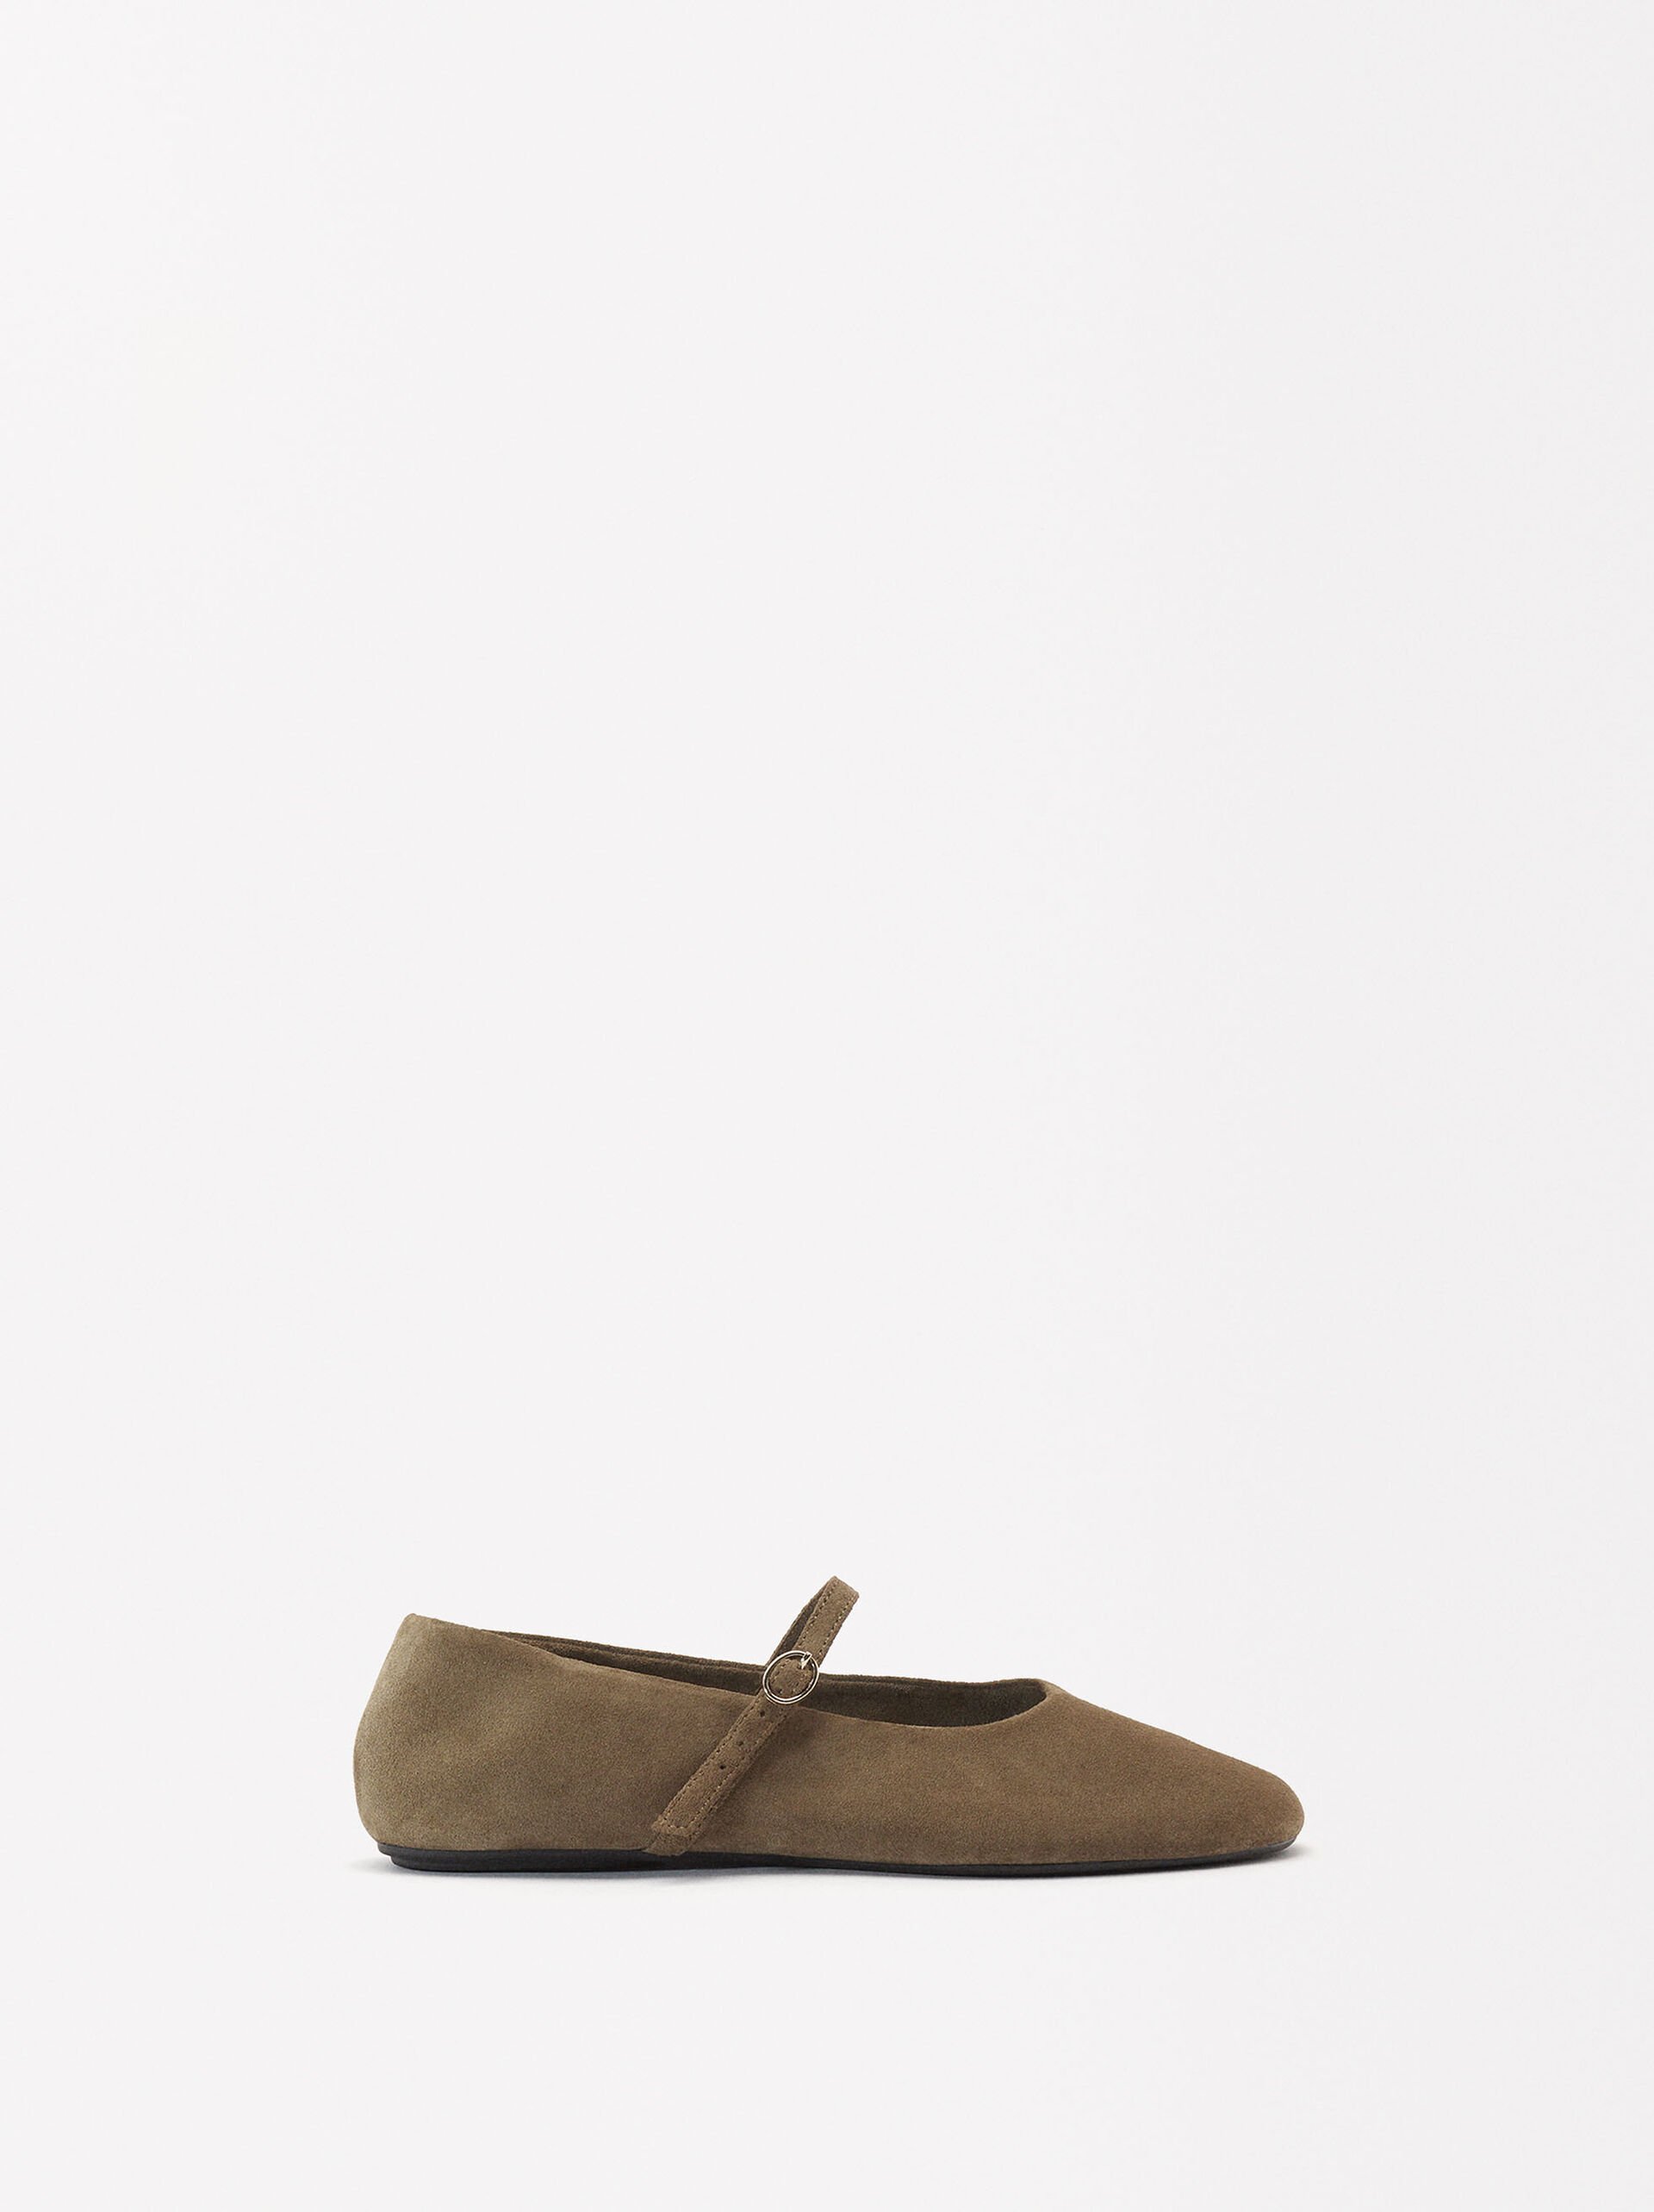 Suede Leather Ballerinas image number 2.0